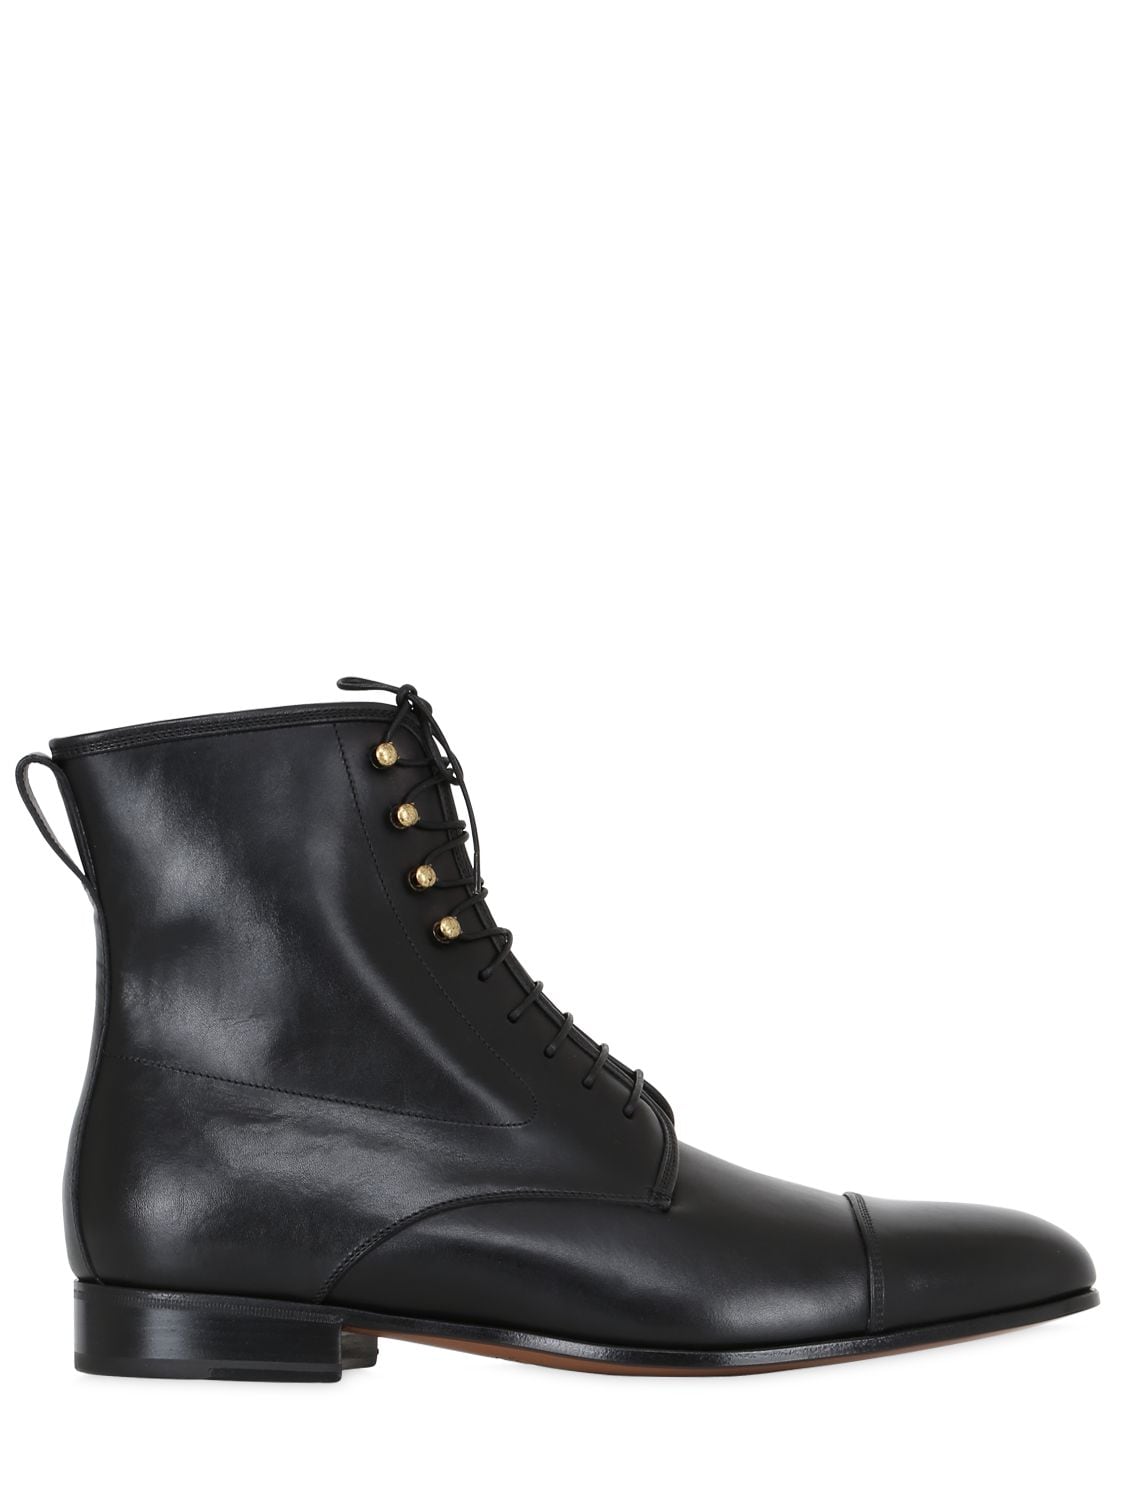 GAUGUIN 2 LEATHER LACE-UP BOOTS